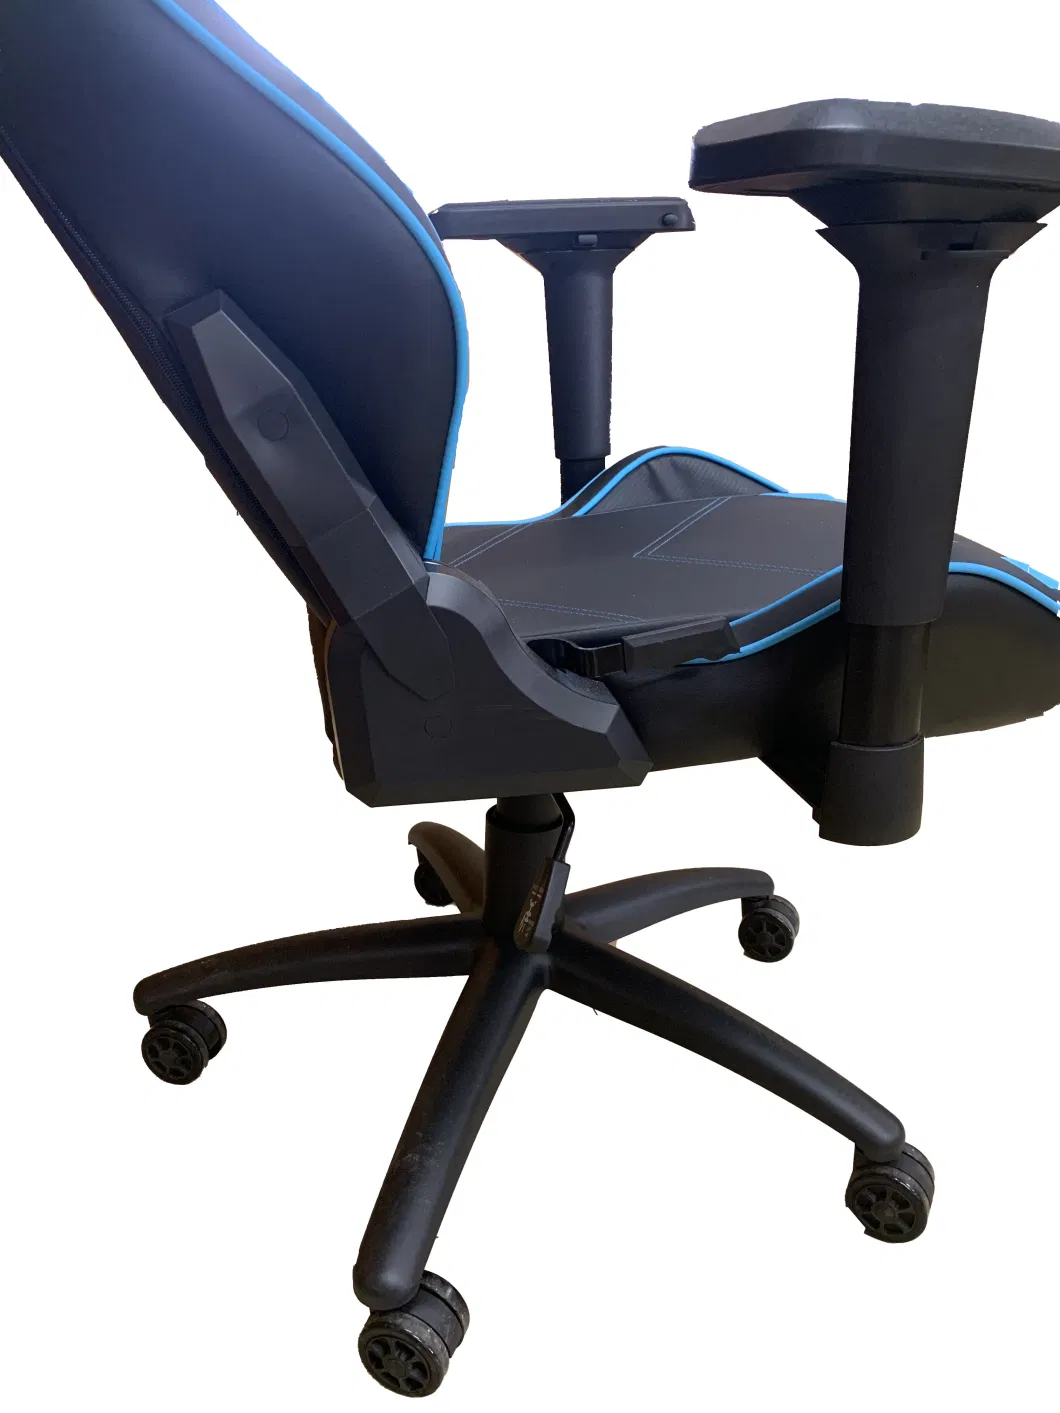 Brand New Low Price 360 Degree Swivel Adjustable Gaming Chair Office Chairs for Play Computer Game, Office